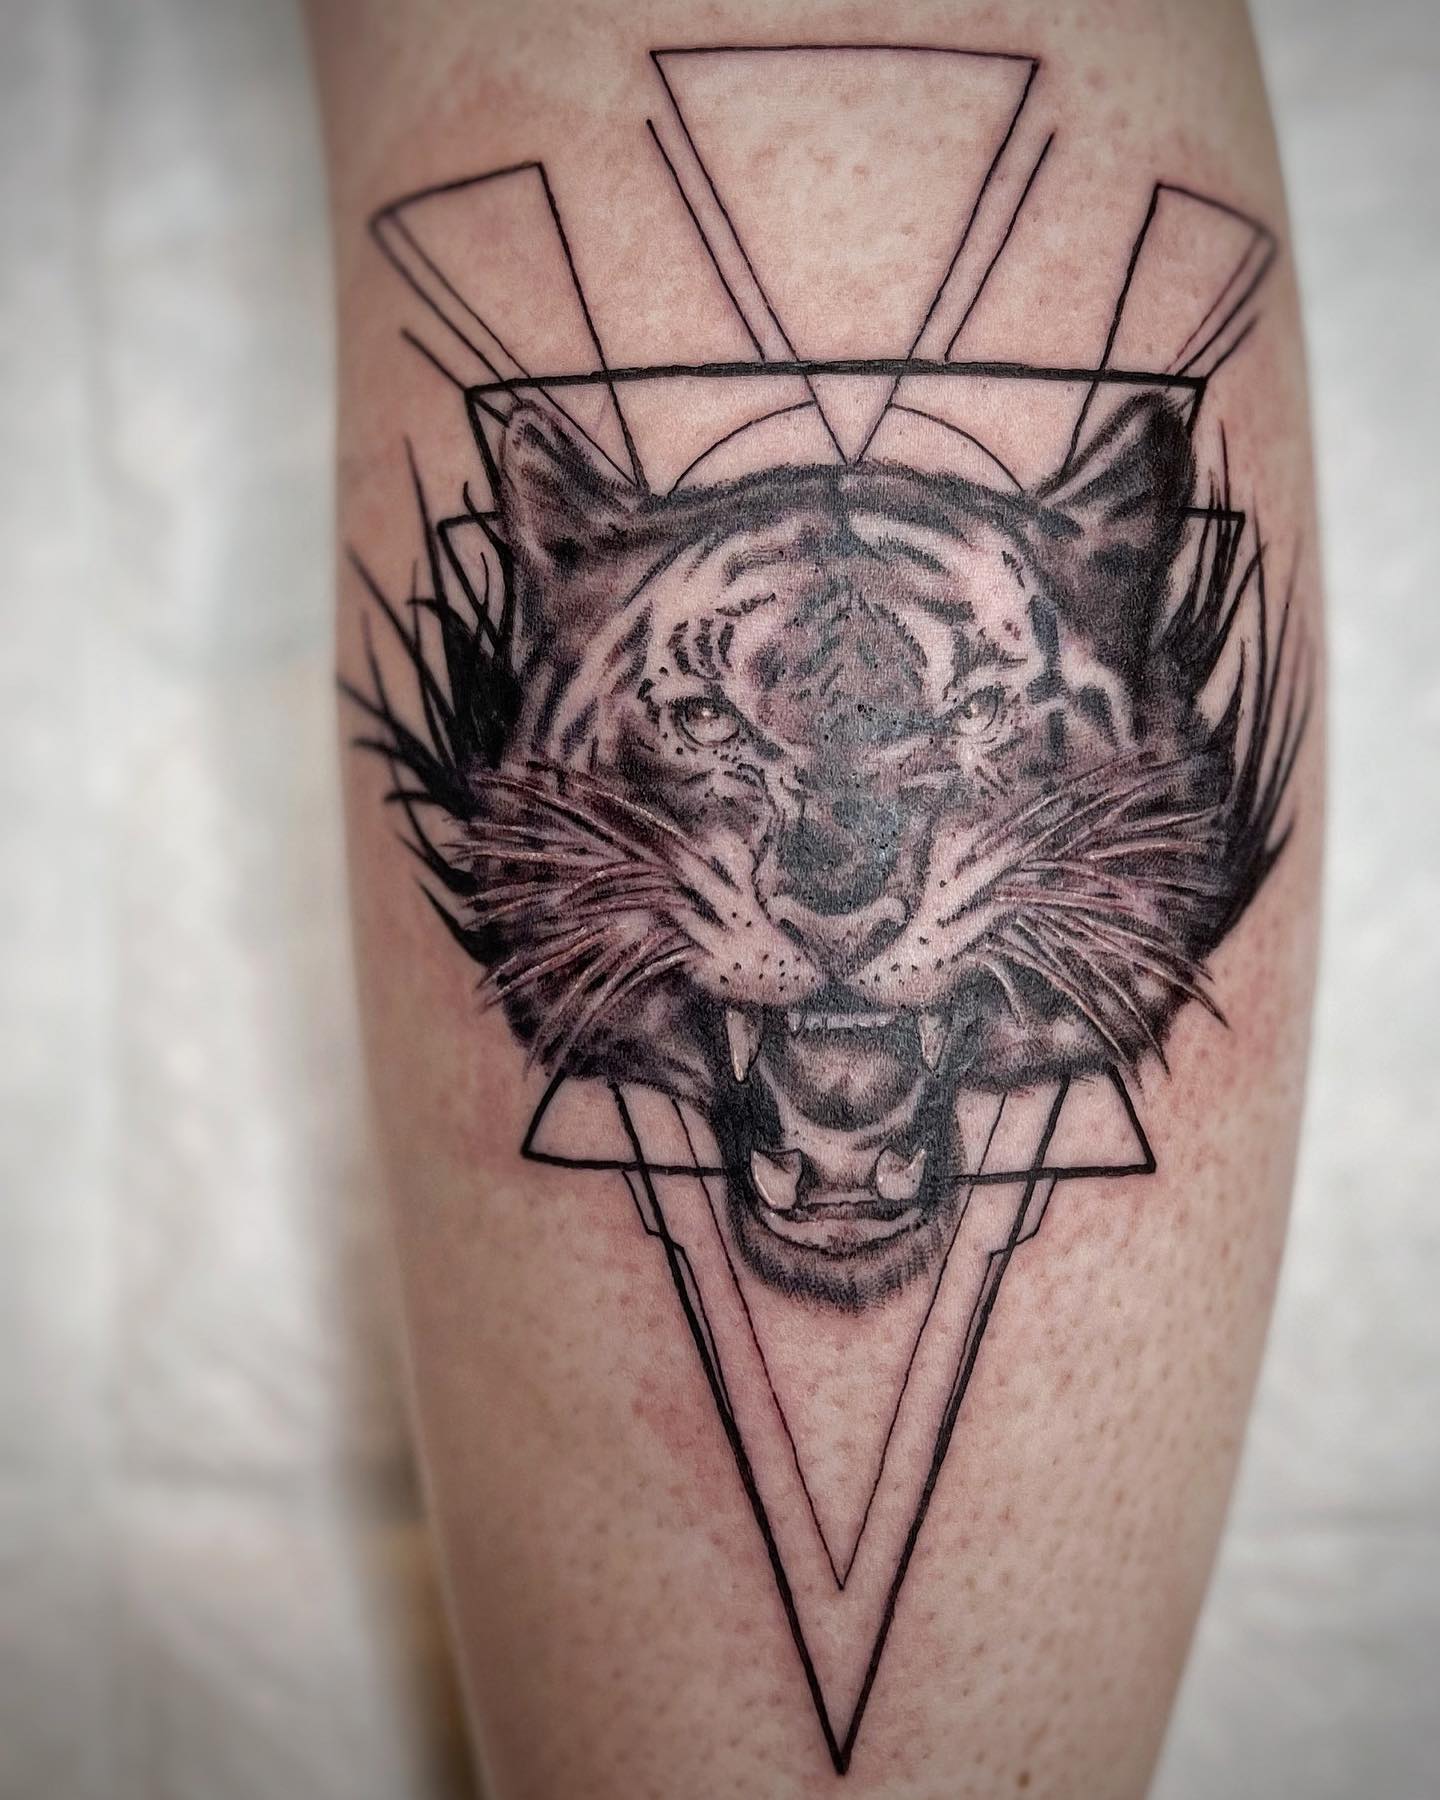 40+ Calf Tattoo Ideas for Men and Women in 2023